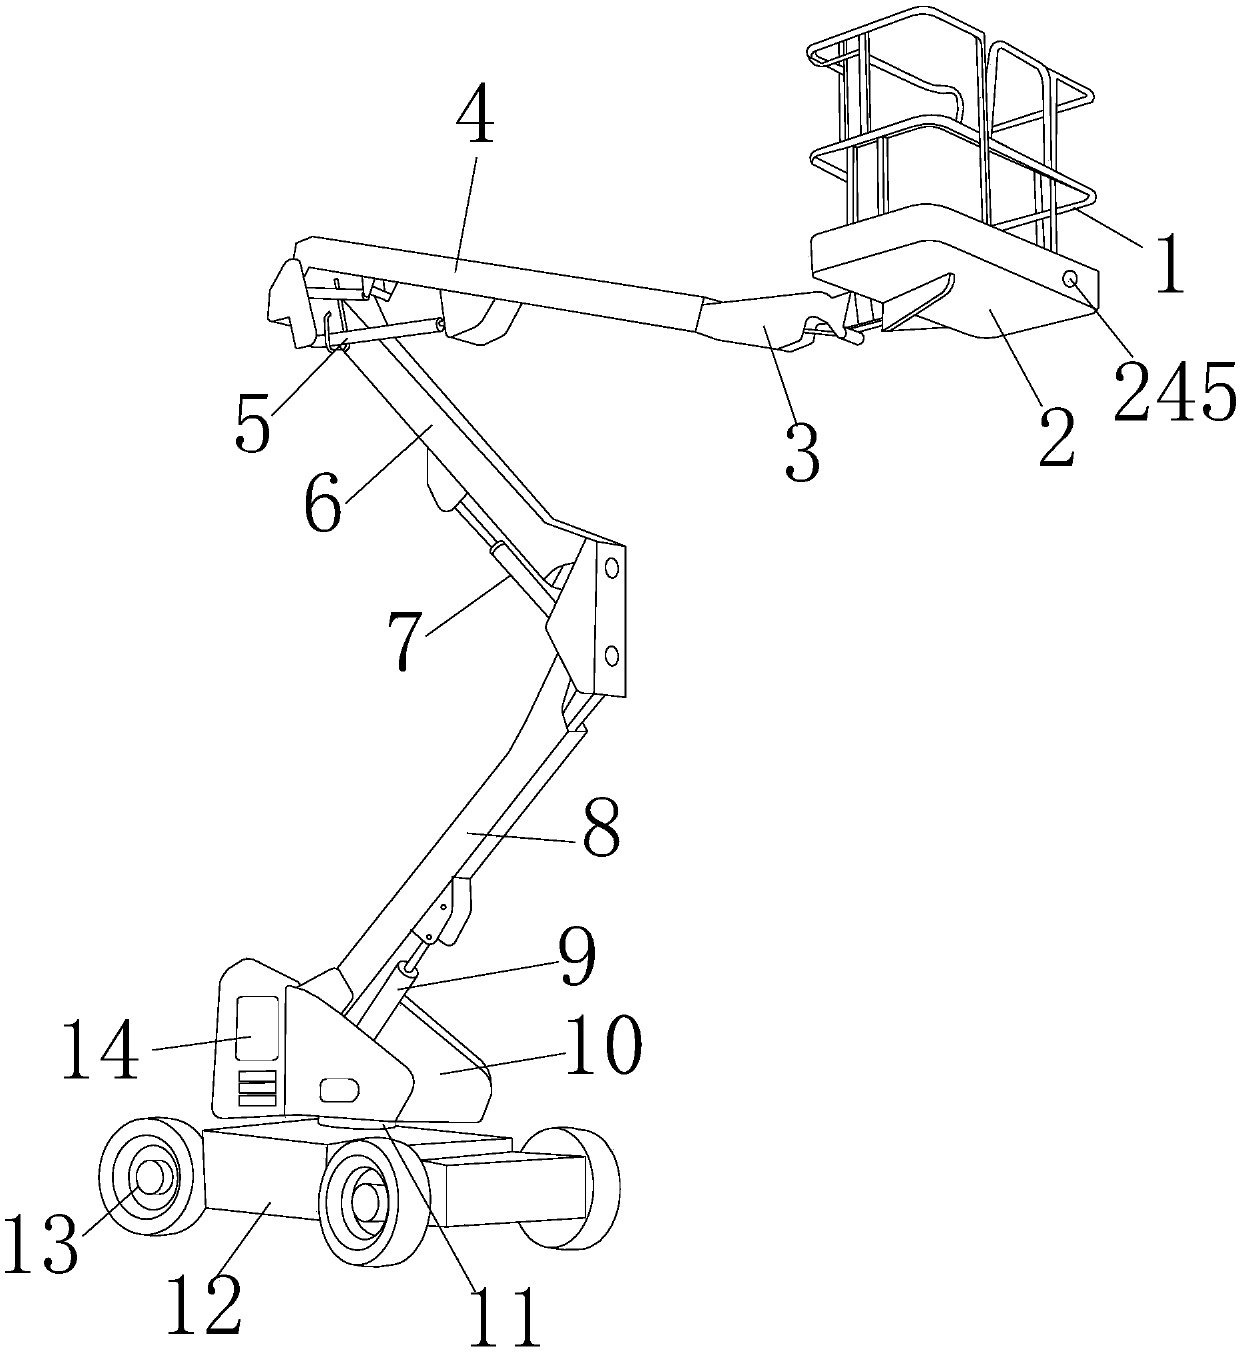 Overhead working device for electric power communication cables